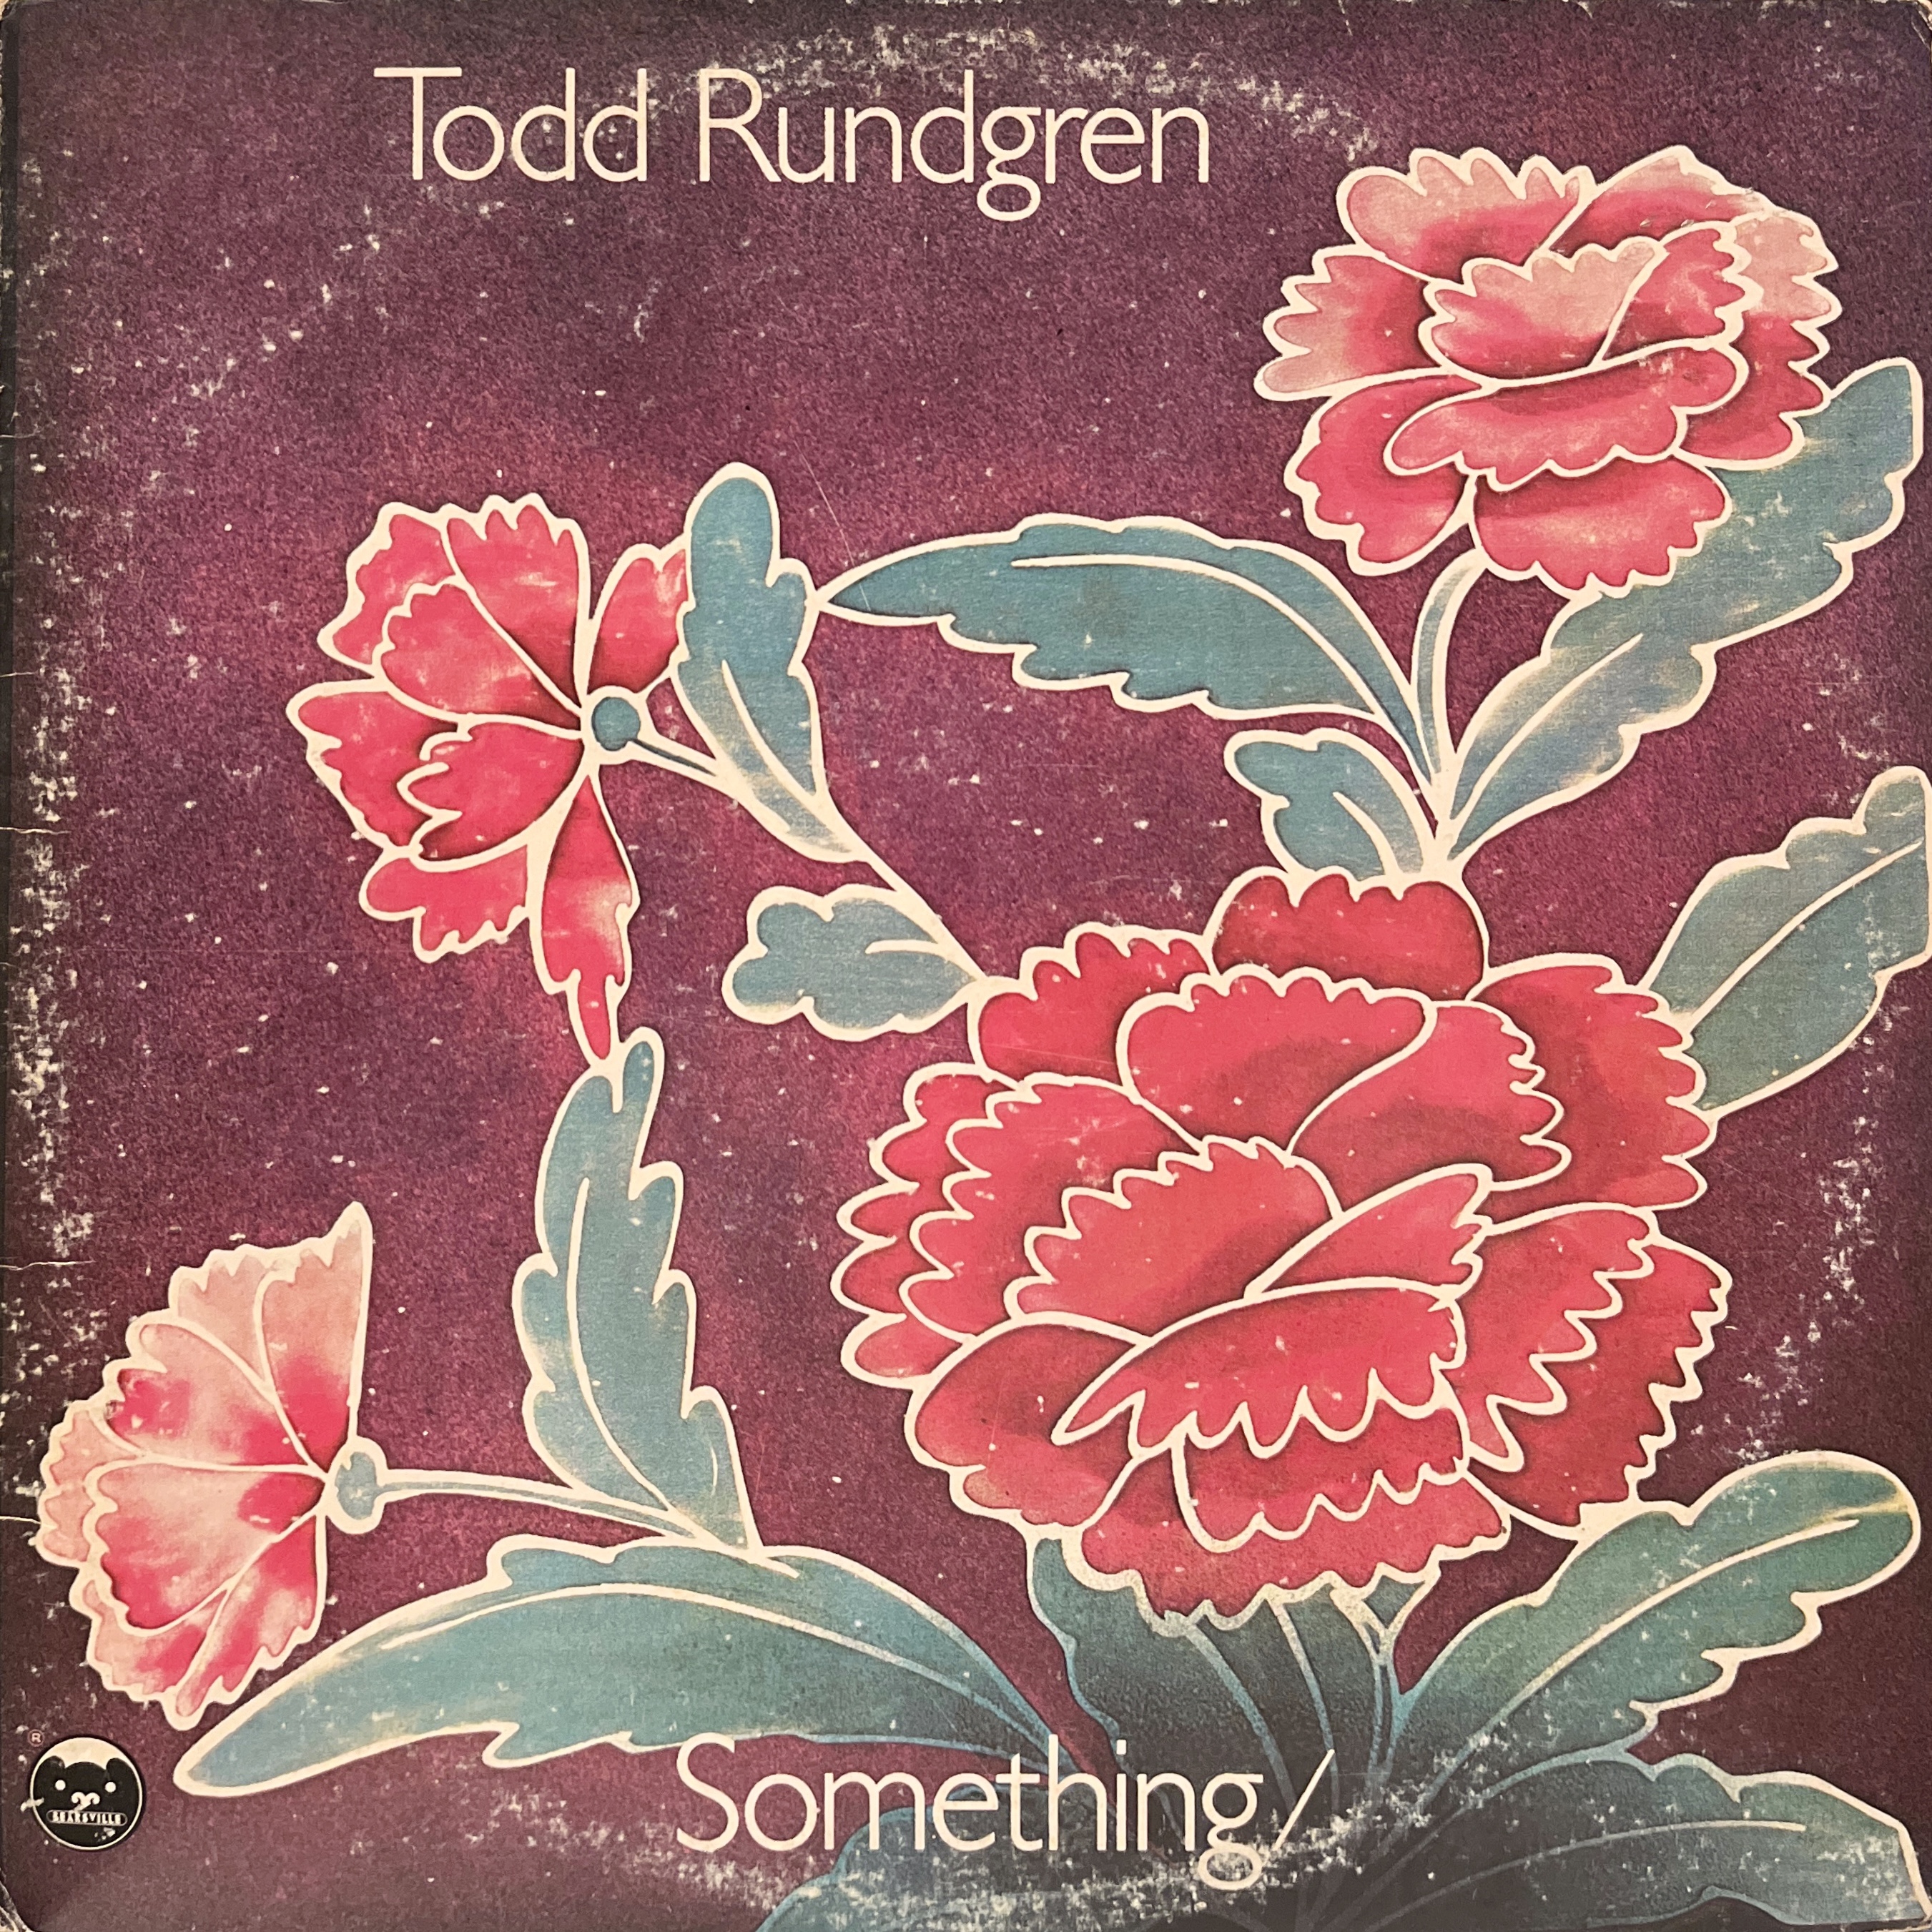 COCONUTS DISK WEBSTORE / Todd Rundgren / Something / Anything